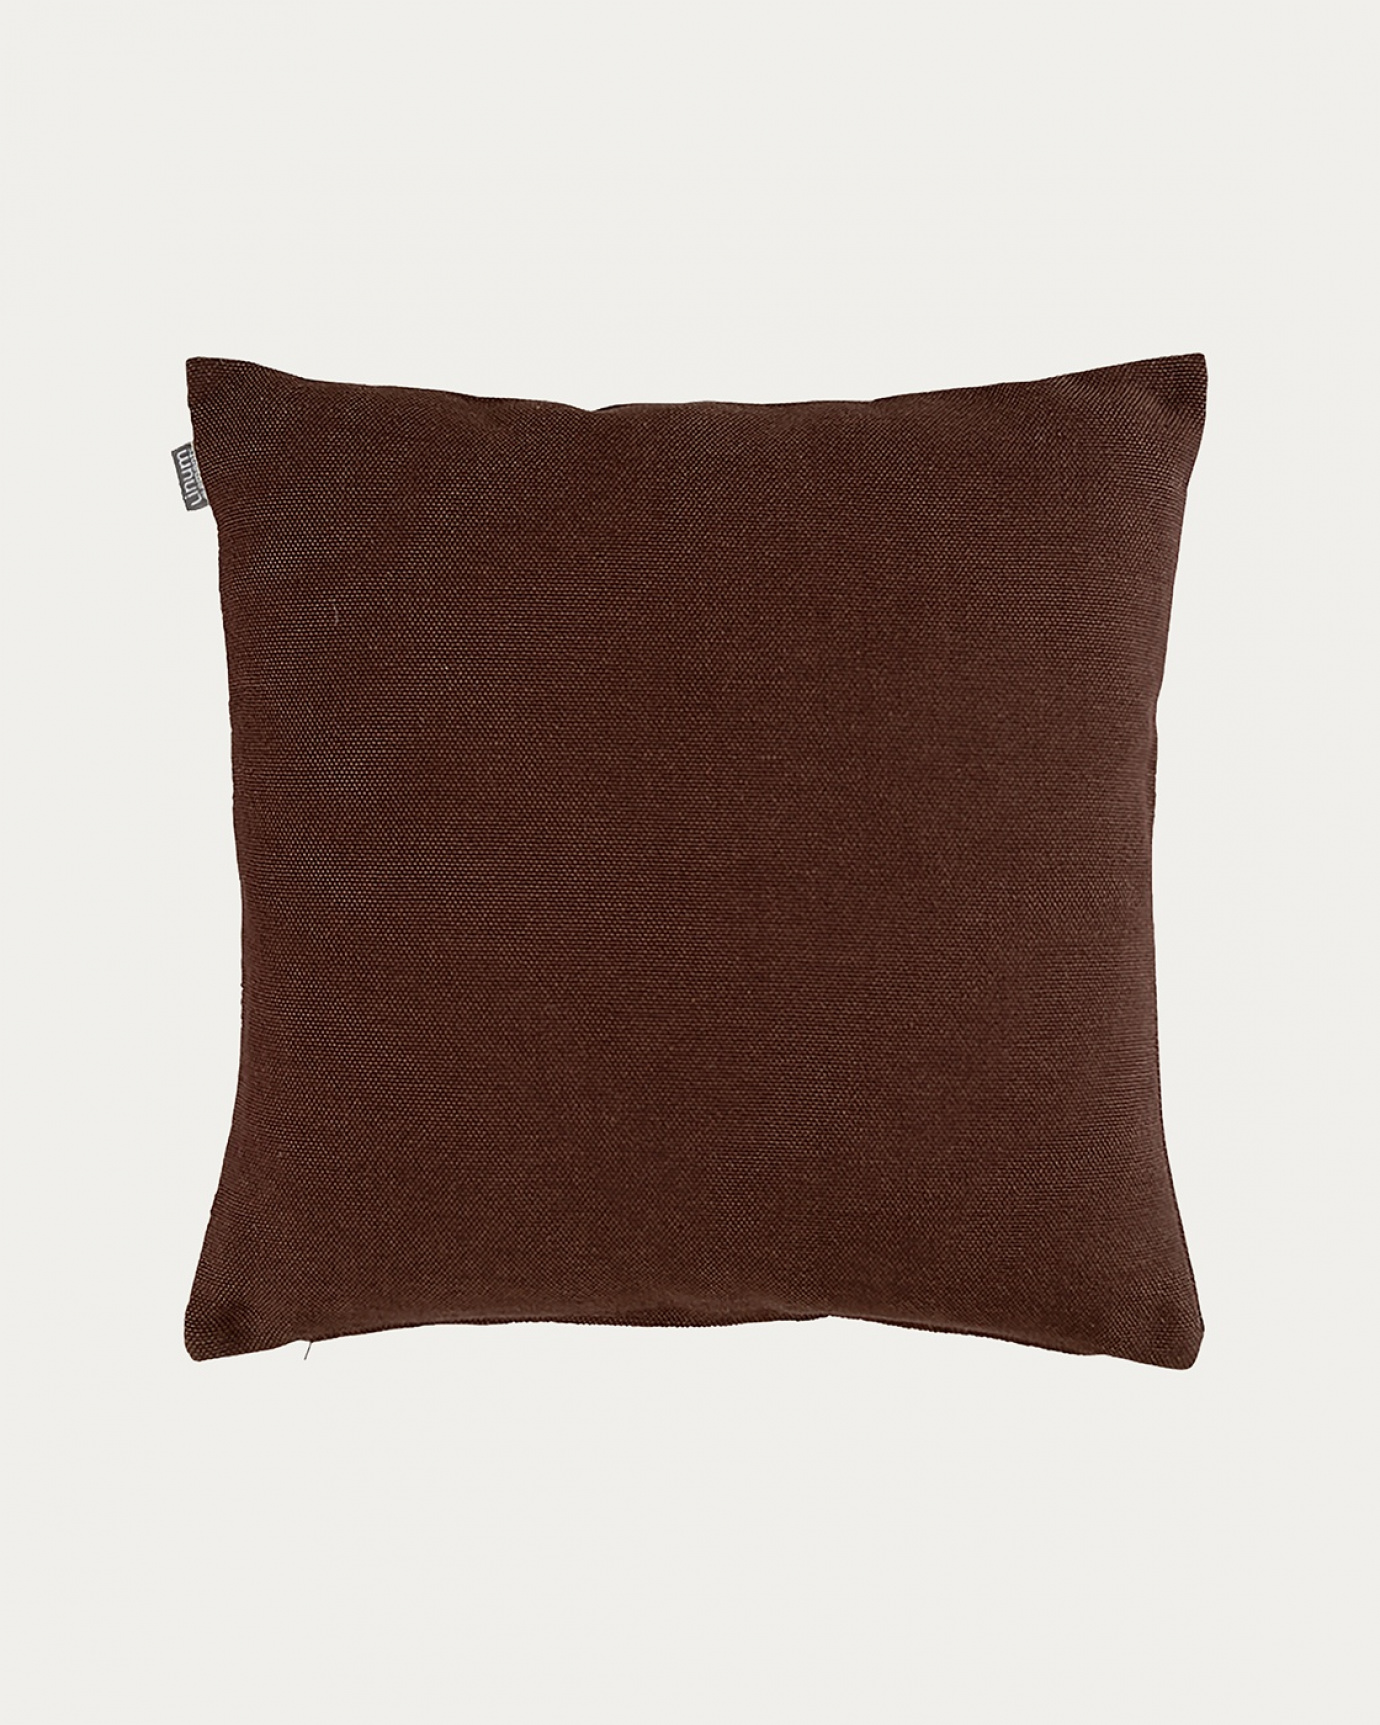 Product image dark brown PEPPER cushion cover made of soft cotton from LINUM DESIGN. Easy to wash and durable for generations. Size 50x50 cm.